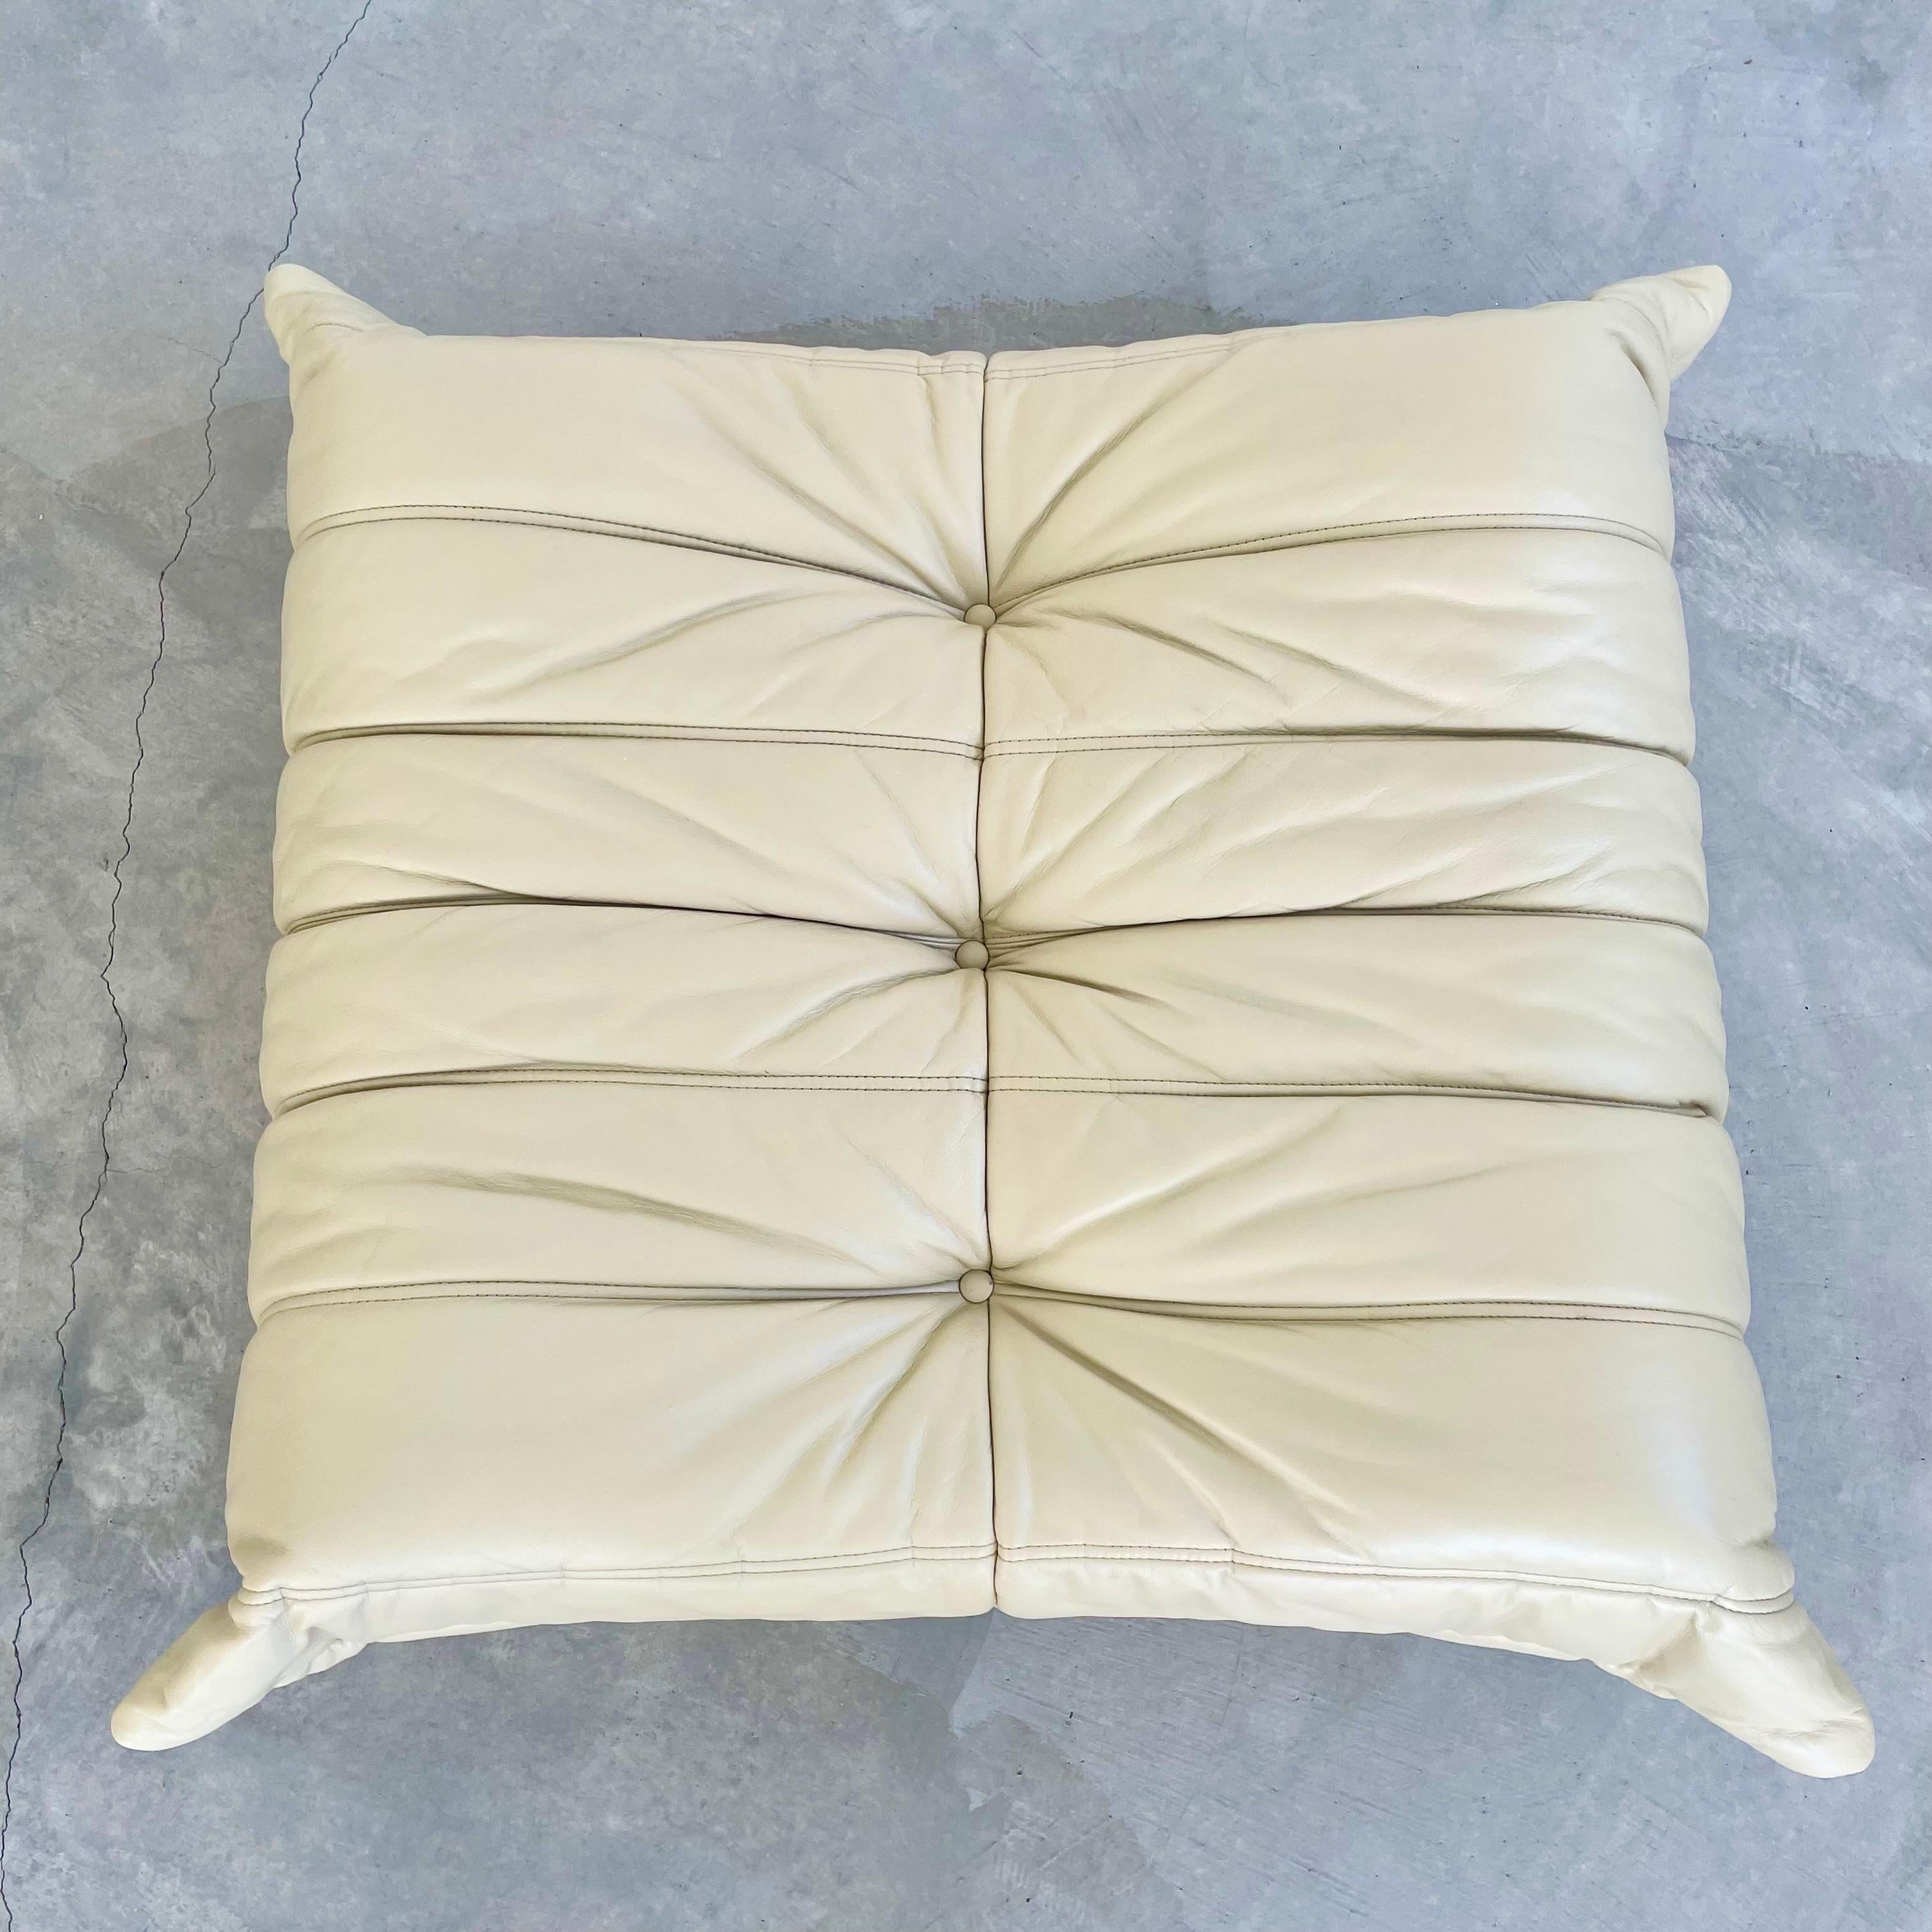 Vintage leather Togo ottoman by Michael Ducaroy for Ligne Roset. Original leather in a beautiful beige color. Comfortable as a footrest or as a seat. Hard to find item. These togo pieces are a perfect addition to any space. Ottoman is in very good